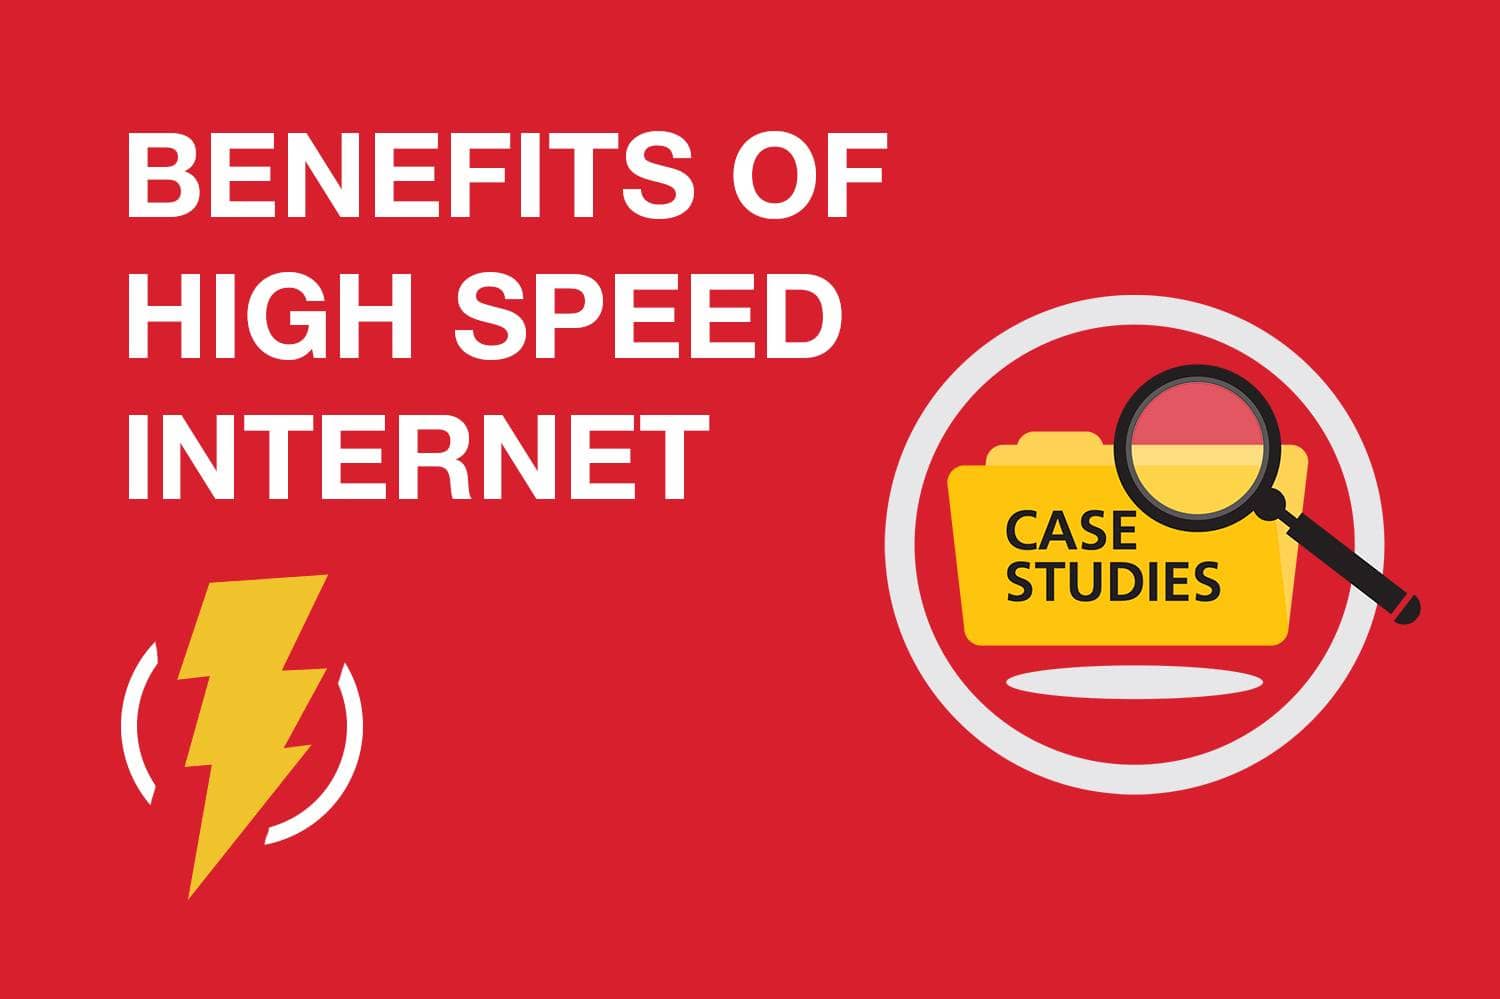 Benefits of High Speed Internet: Case Study Research